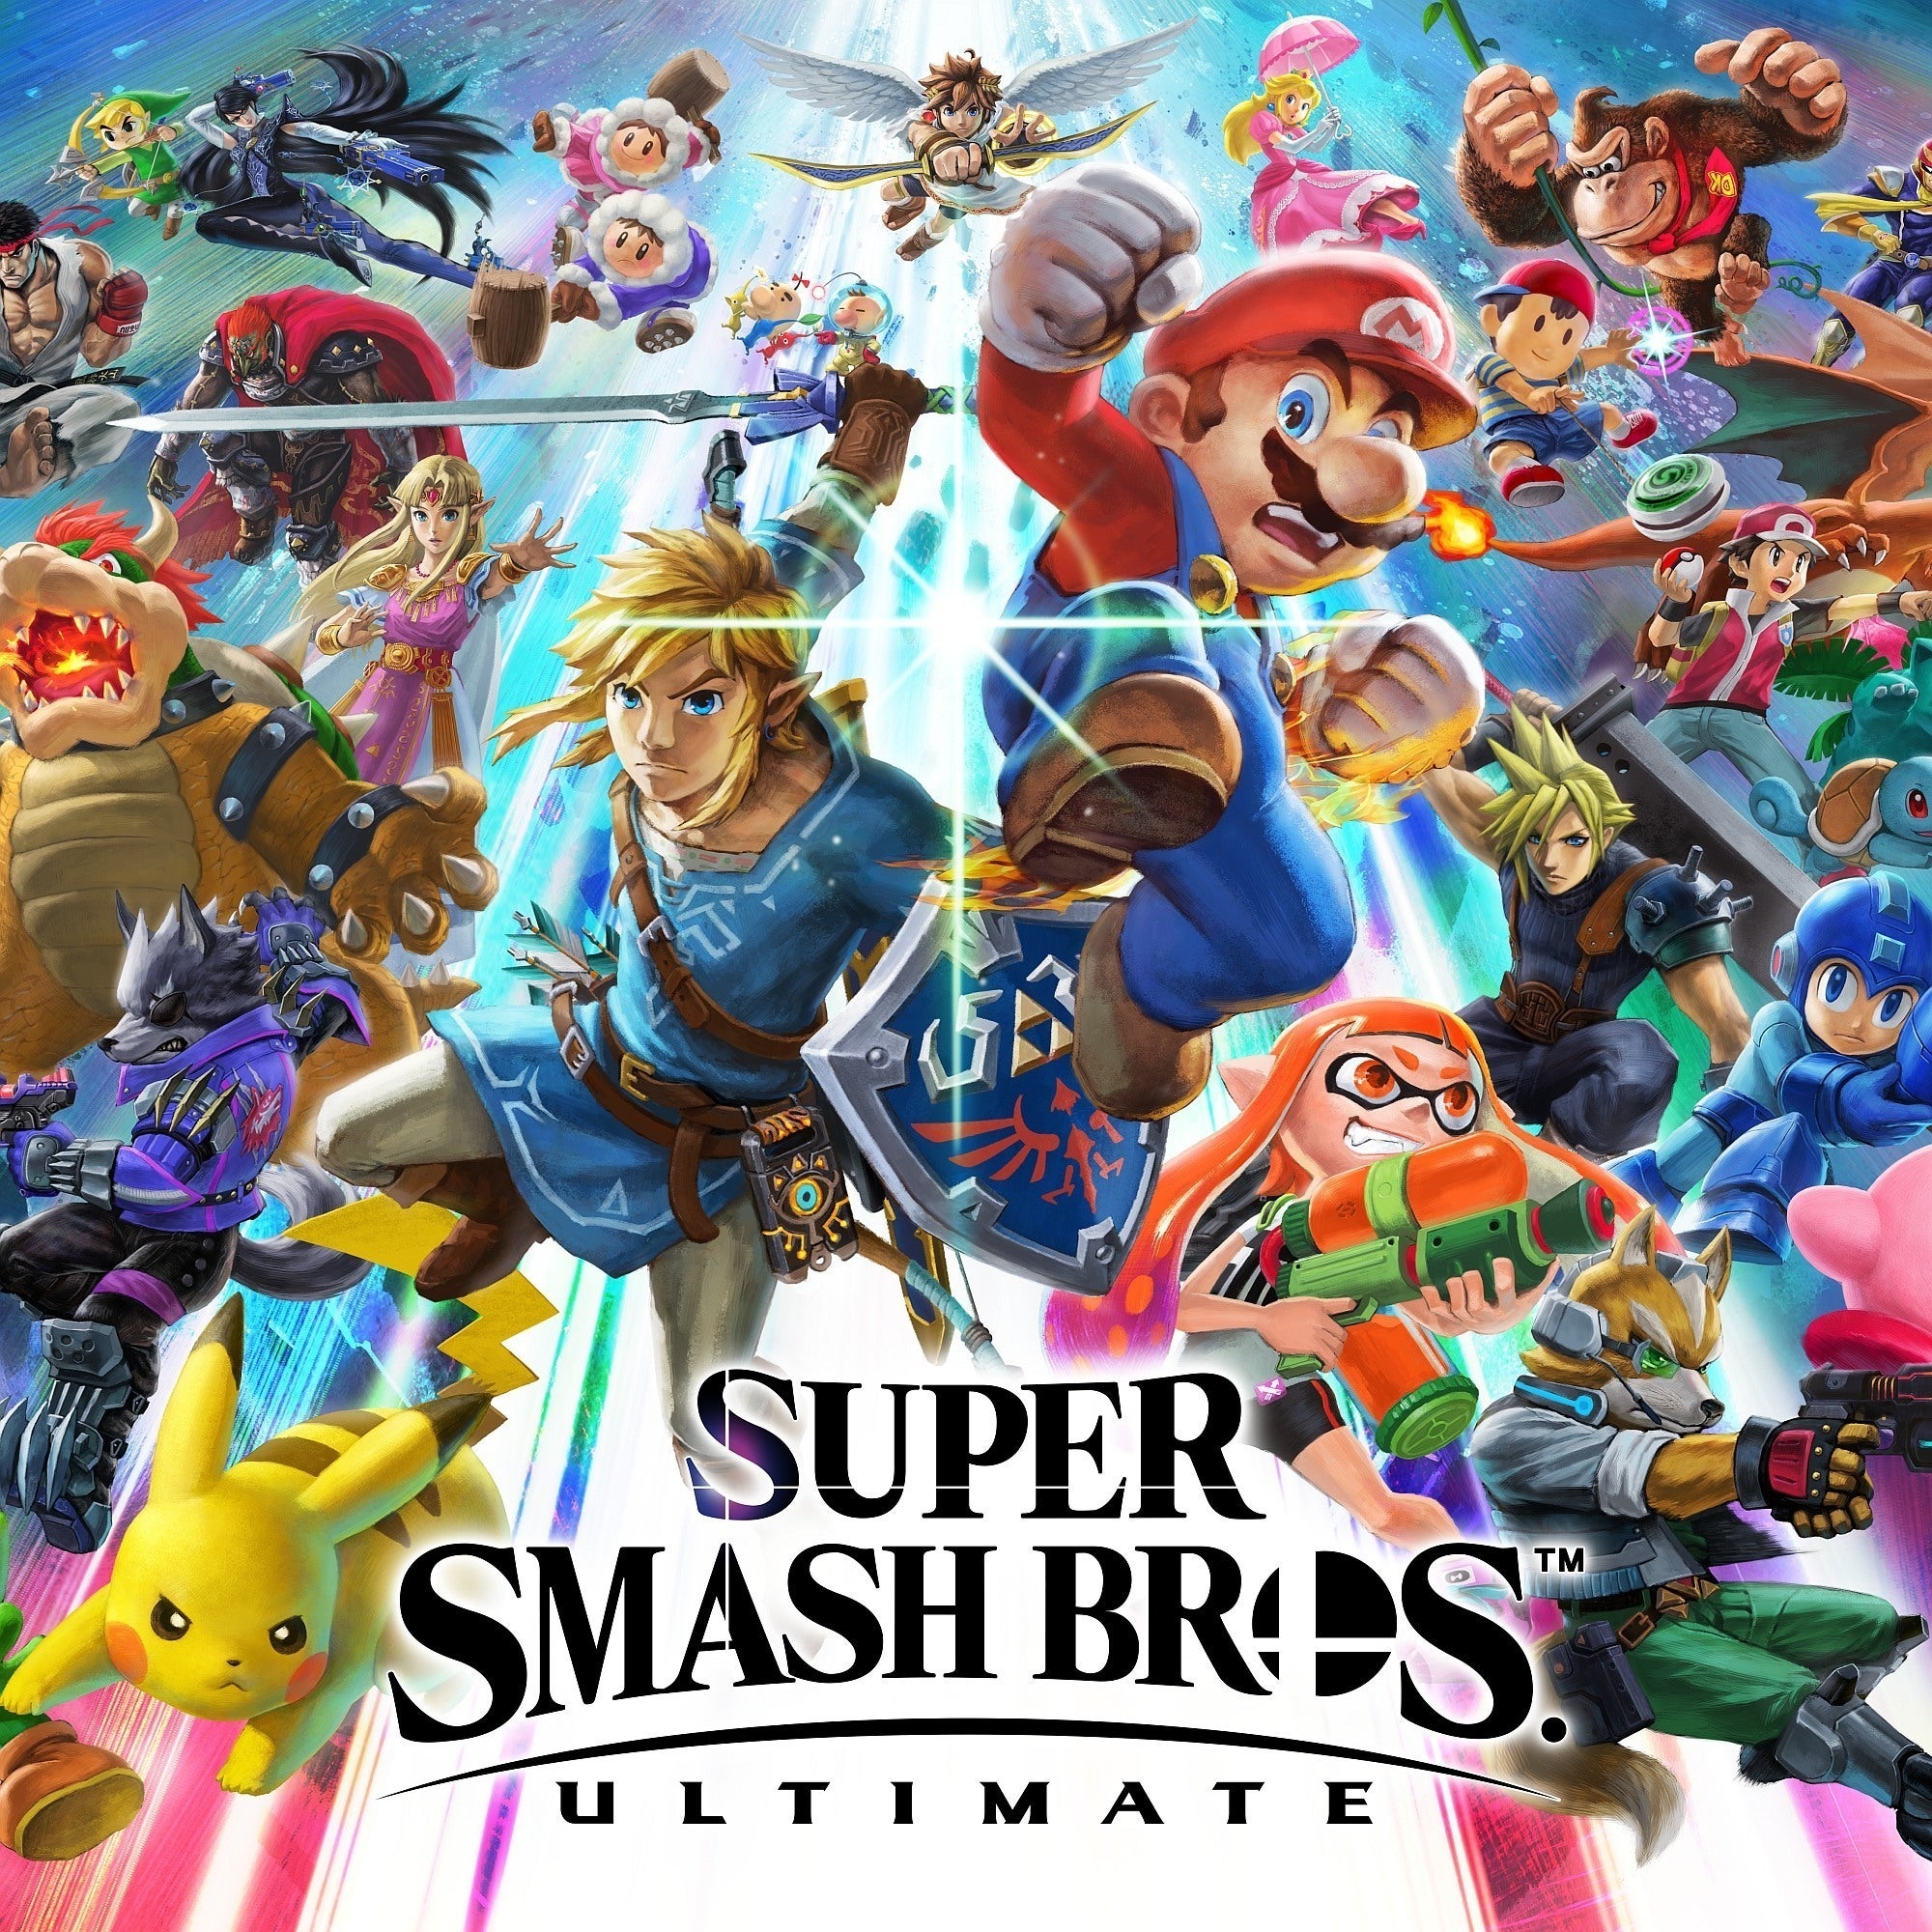 Super Smash Bros Ultimate tips, from the basics to more advanced strategies | coinlog.fun